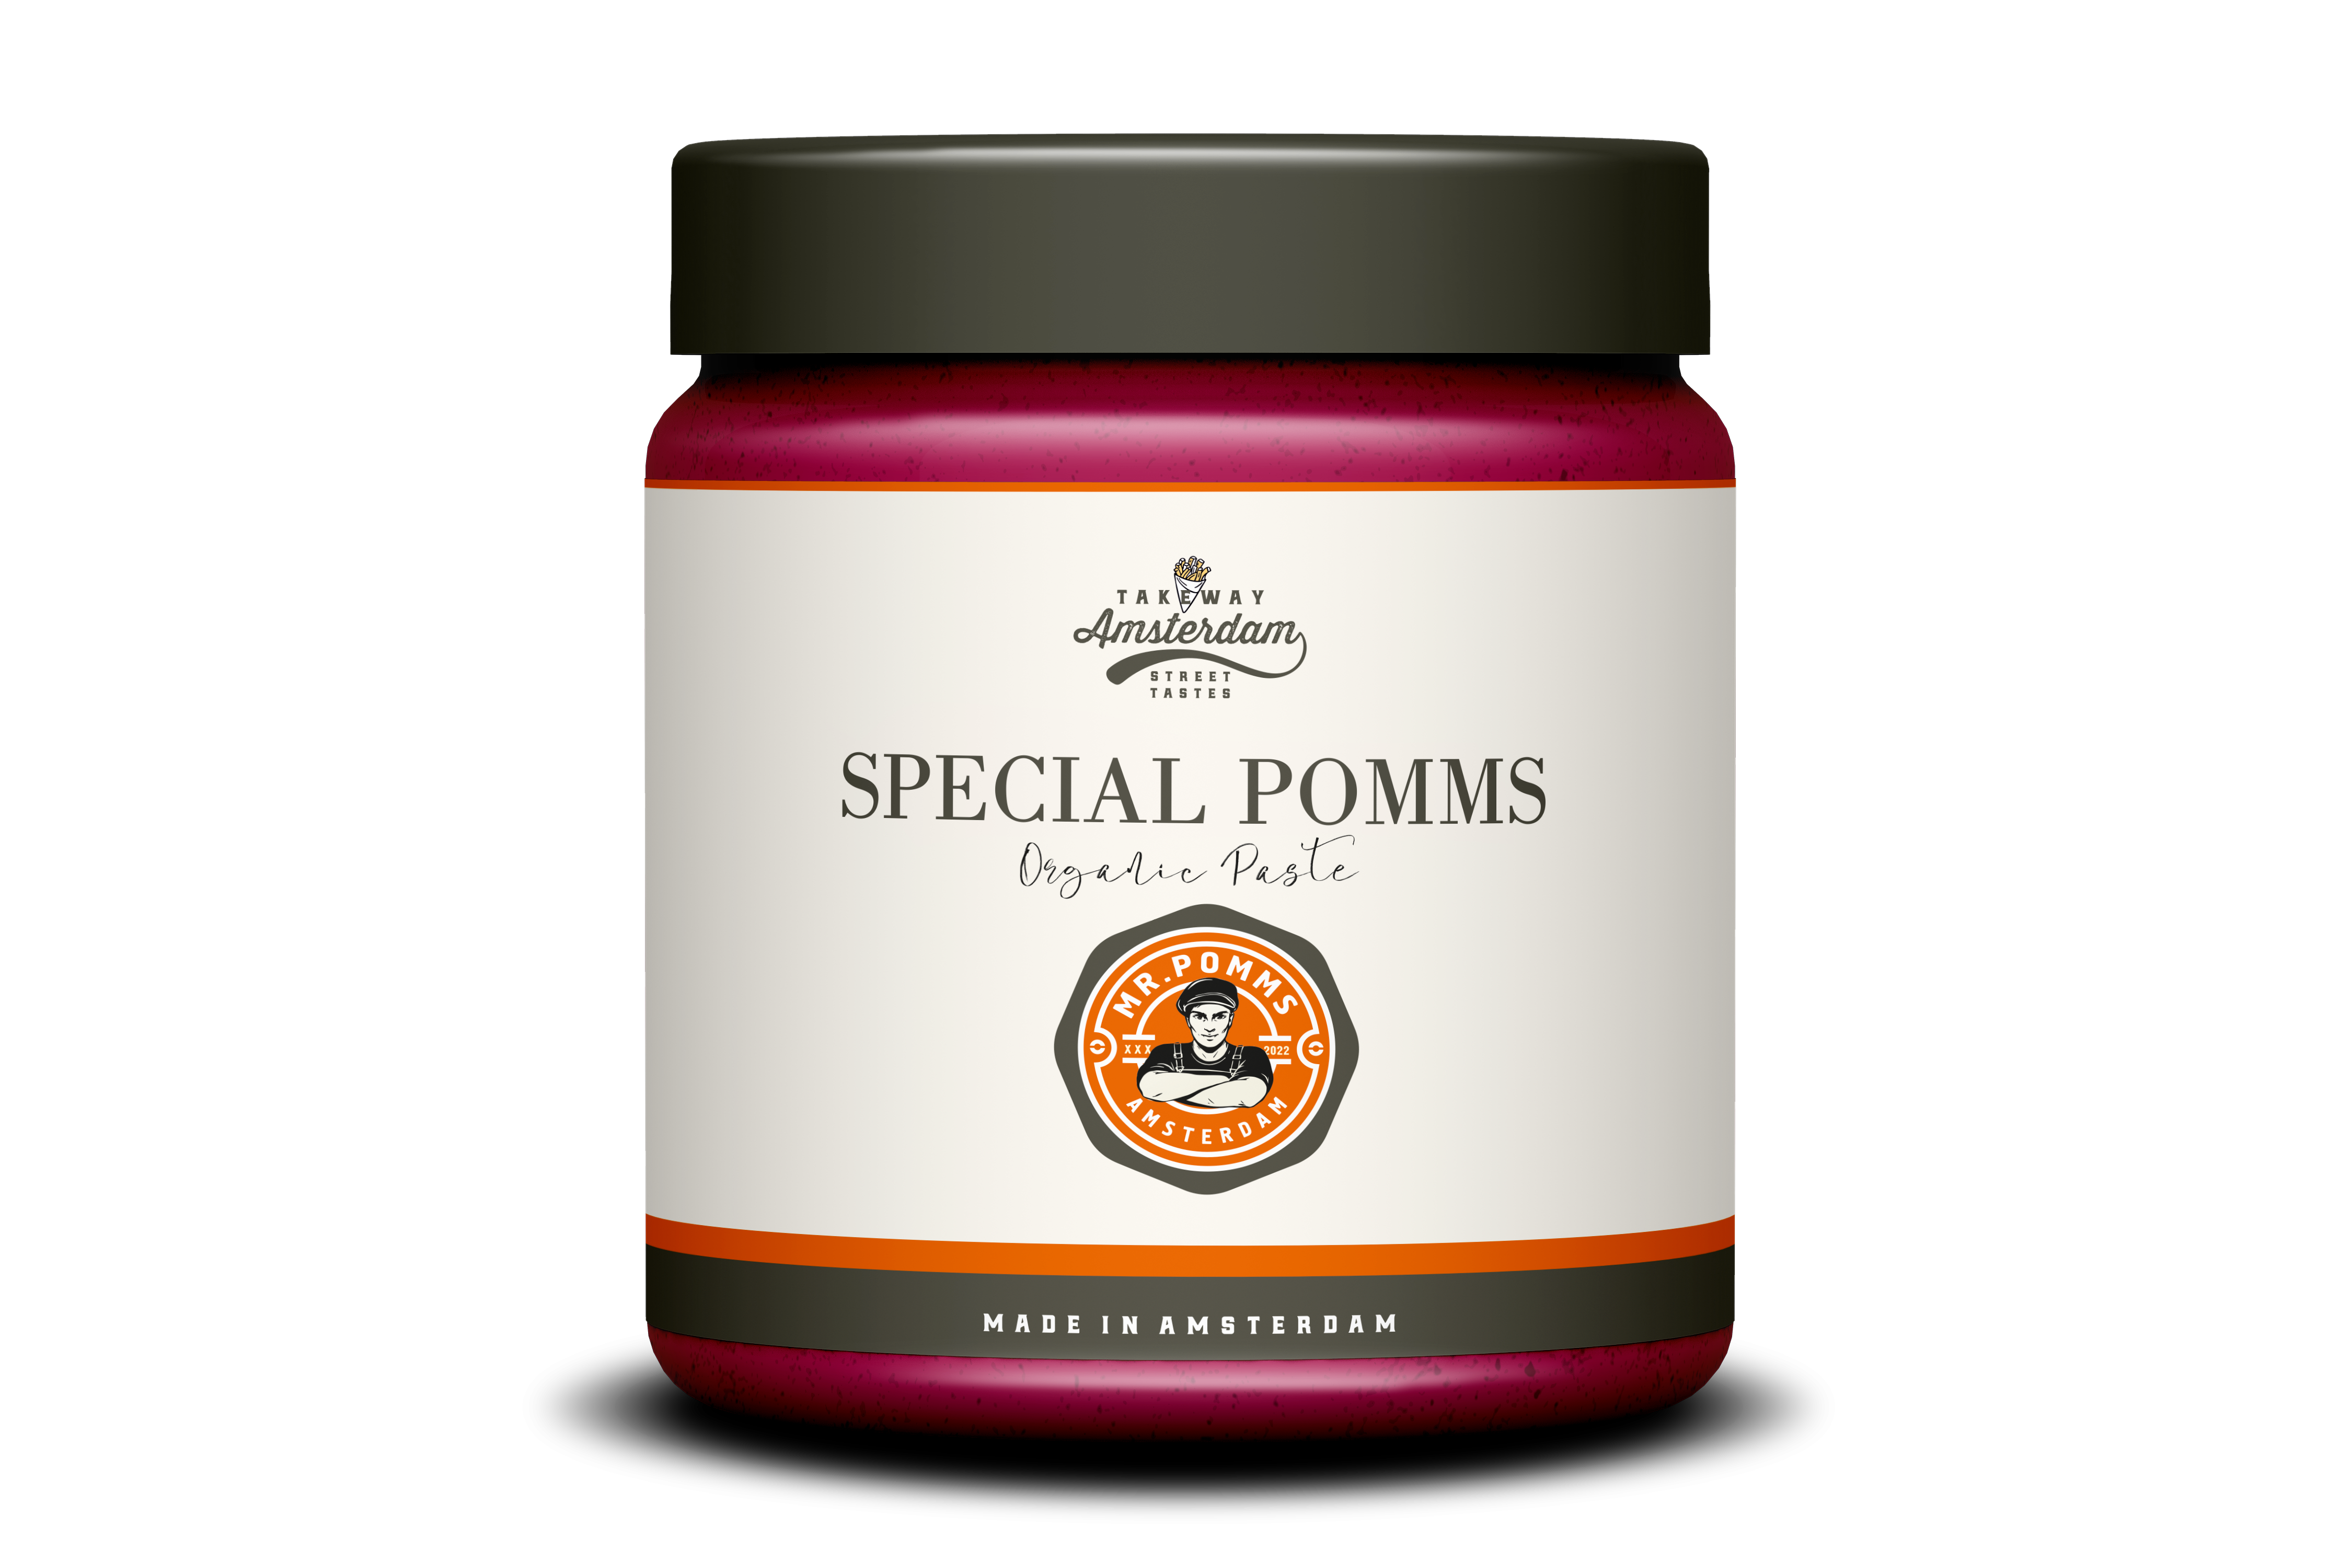 SPECIAL POMMS